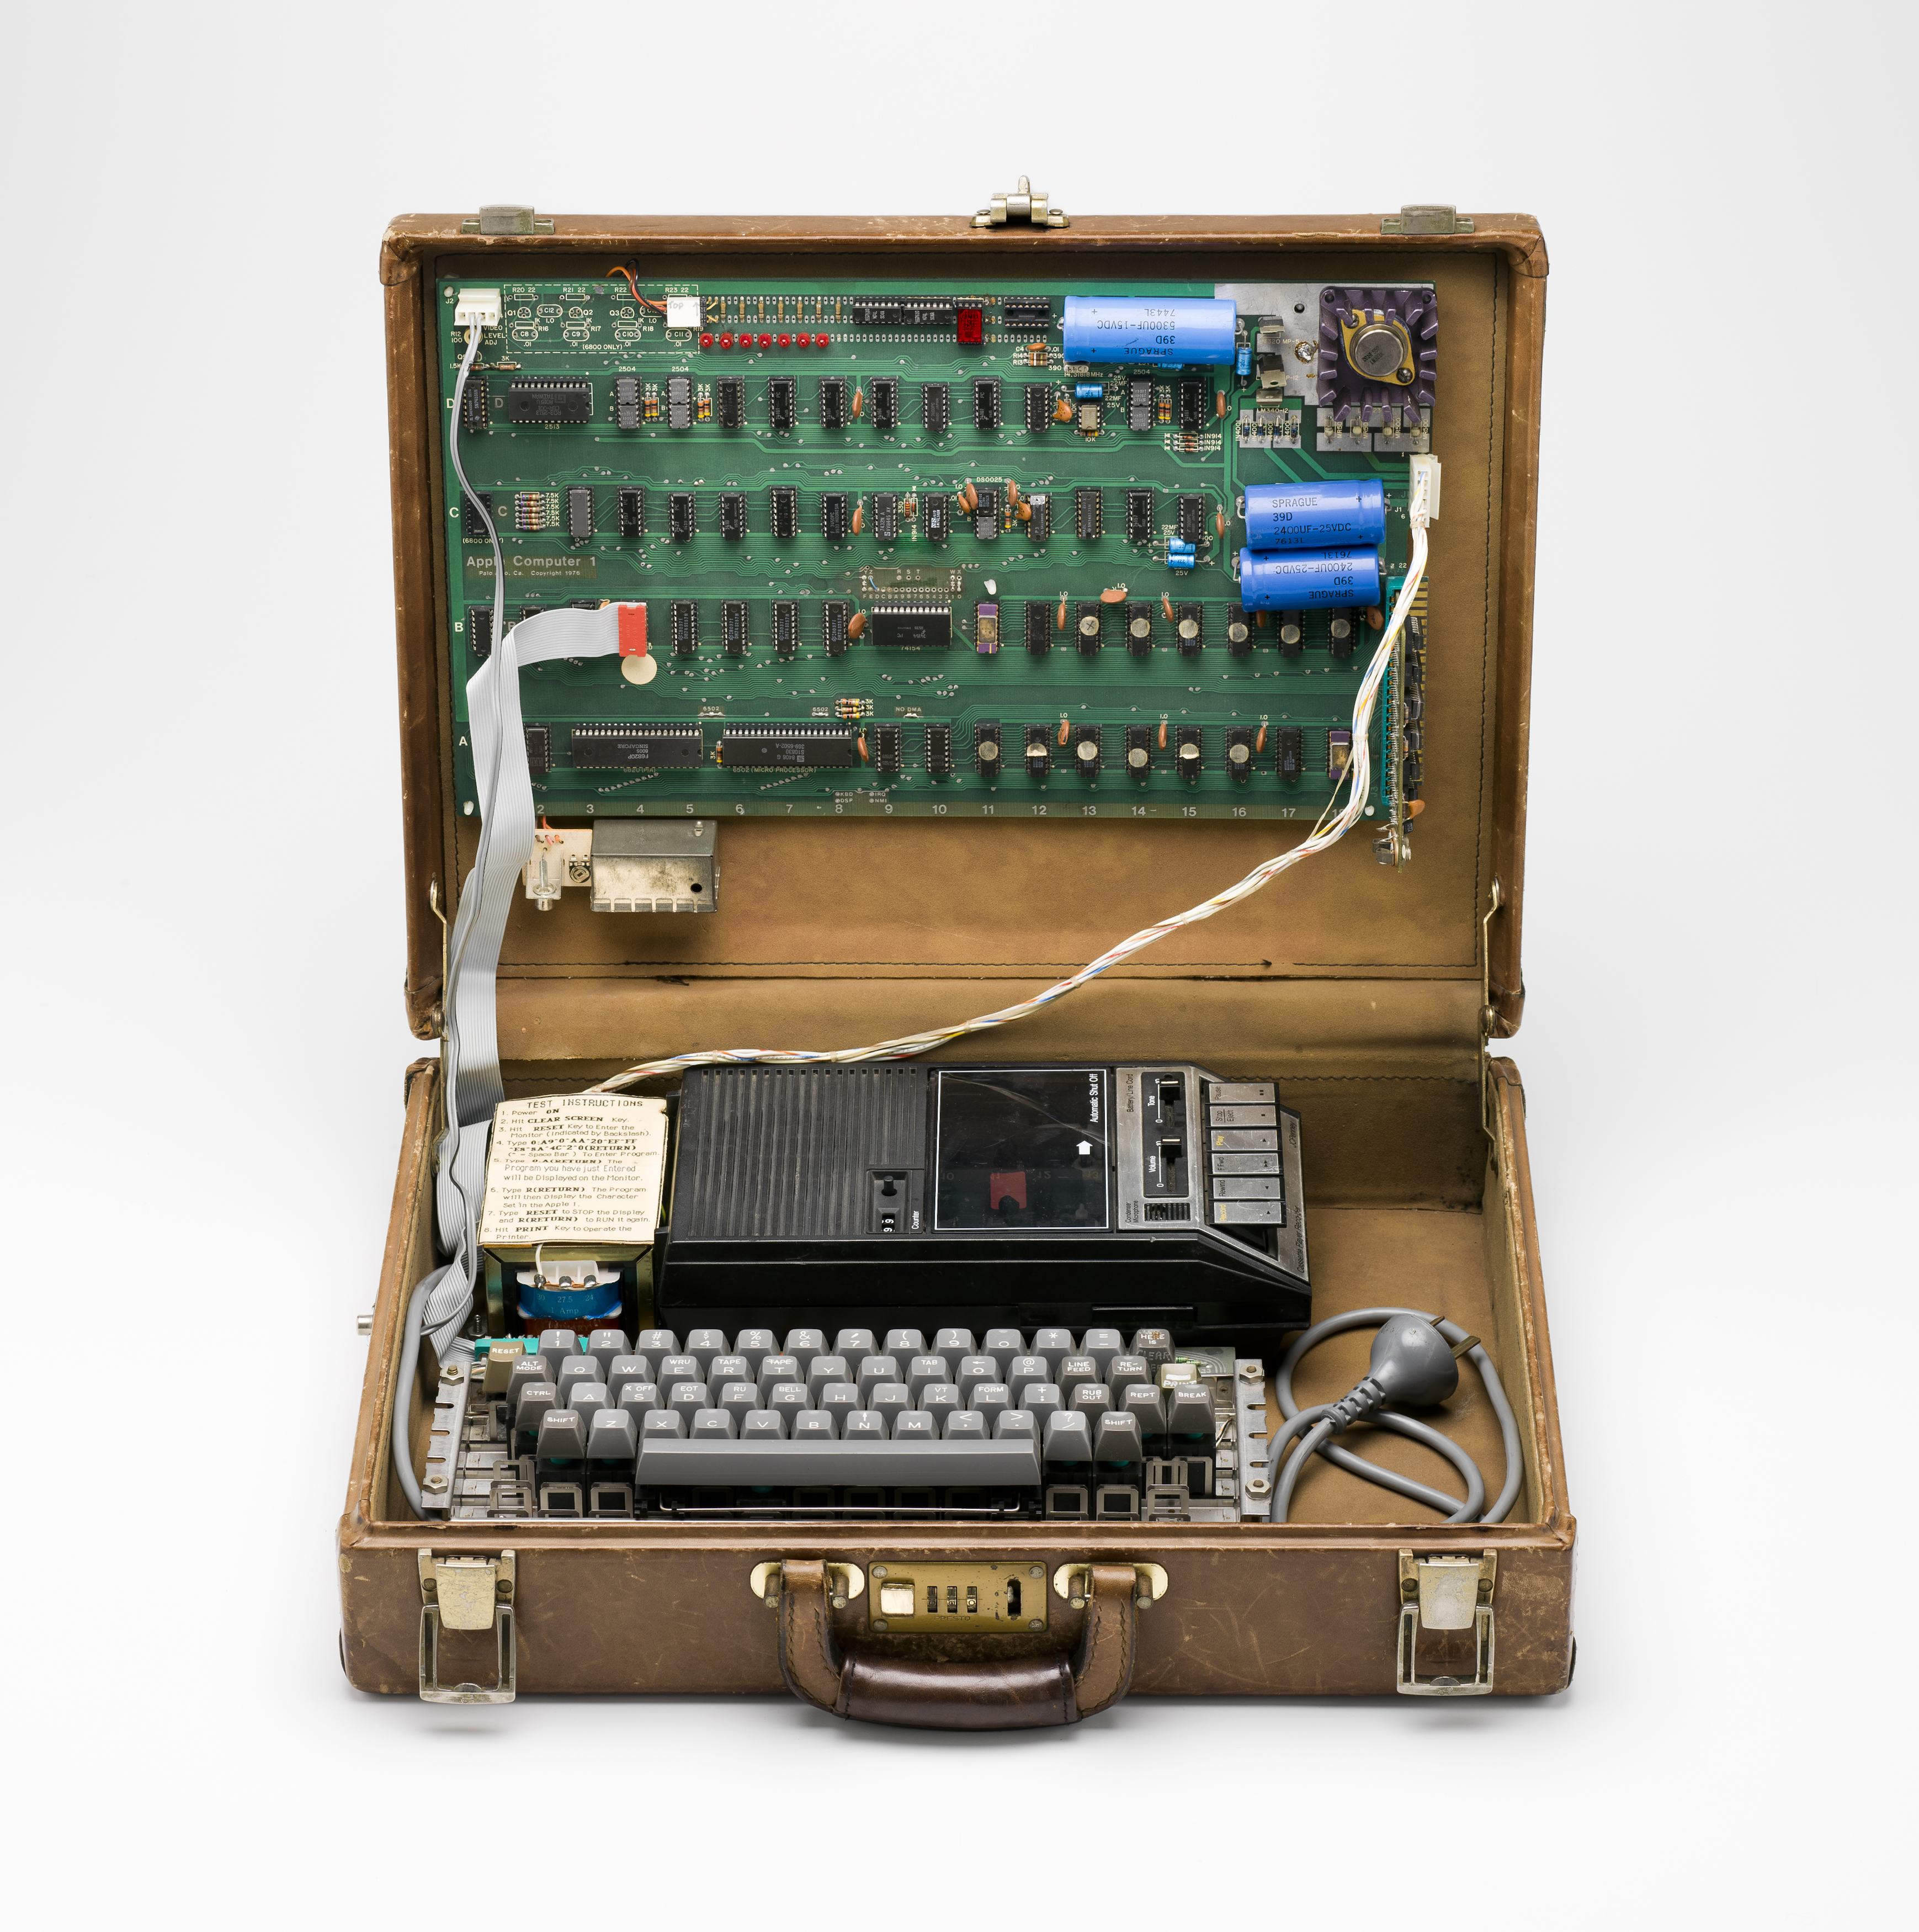 A brown leather suitcase is open withe the green motherboard attached to the inside of the lid. Sitting in the suitcase base is a keyboard and tape recorder.